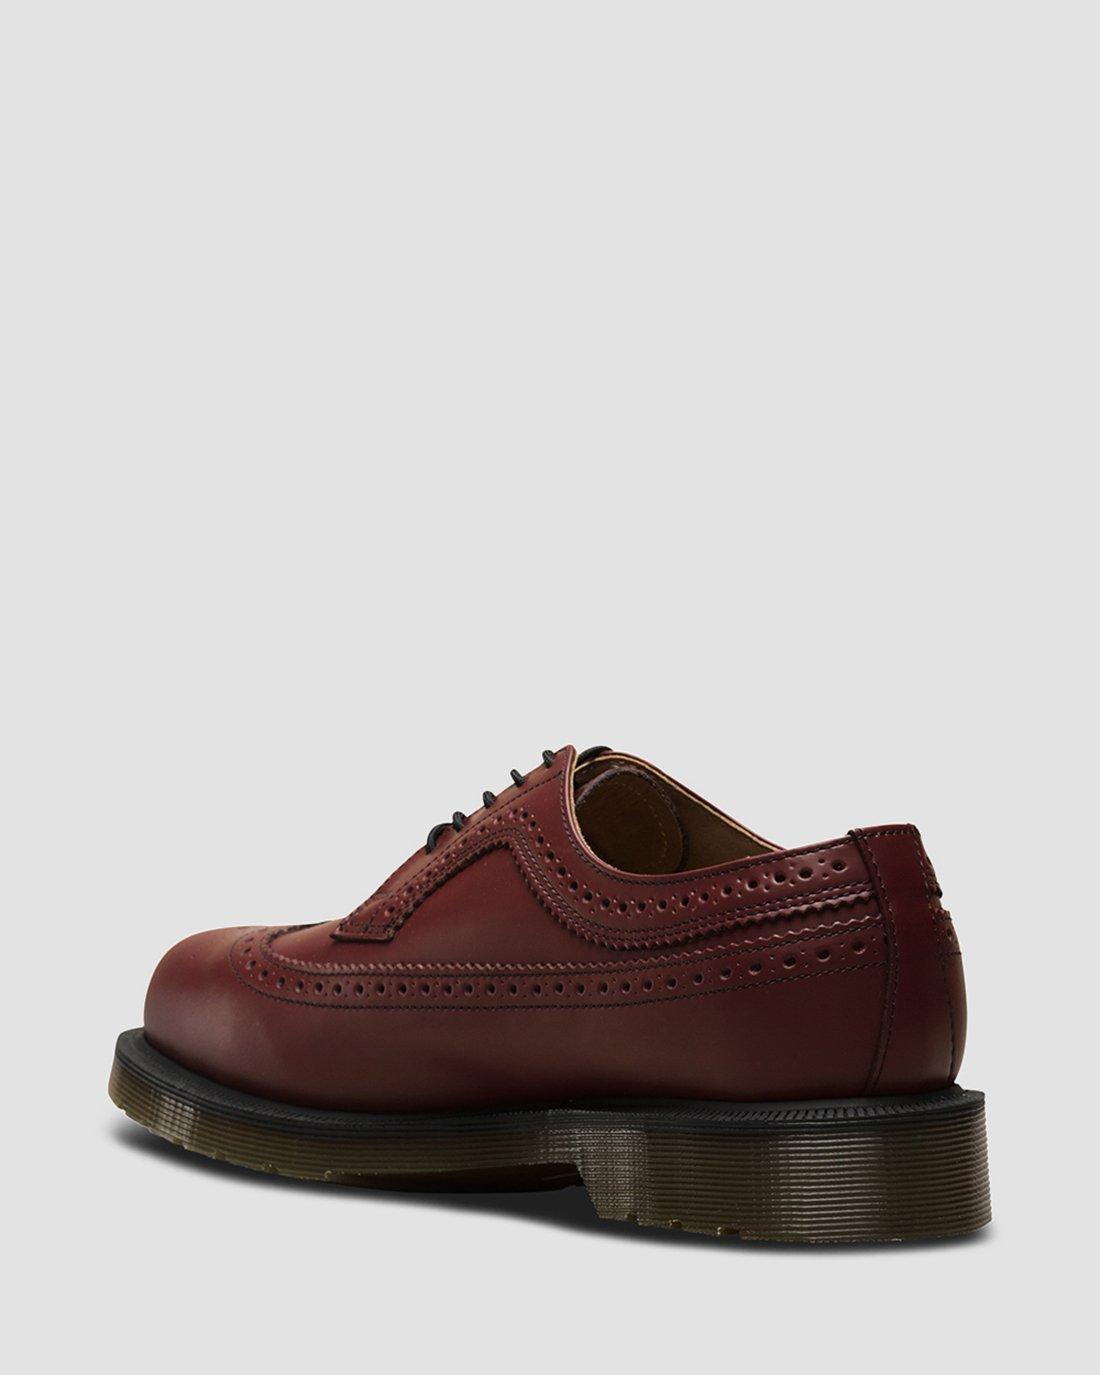 3989 Smooth Leather Brogue Shoes | Dr. Martens